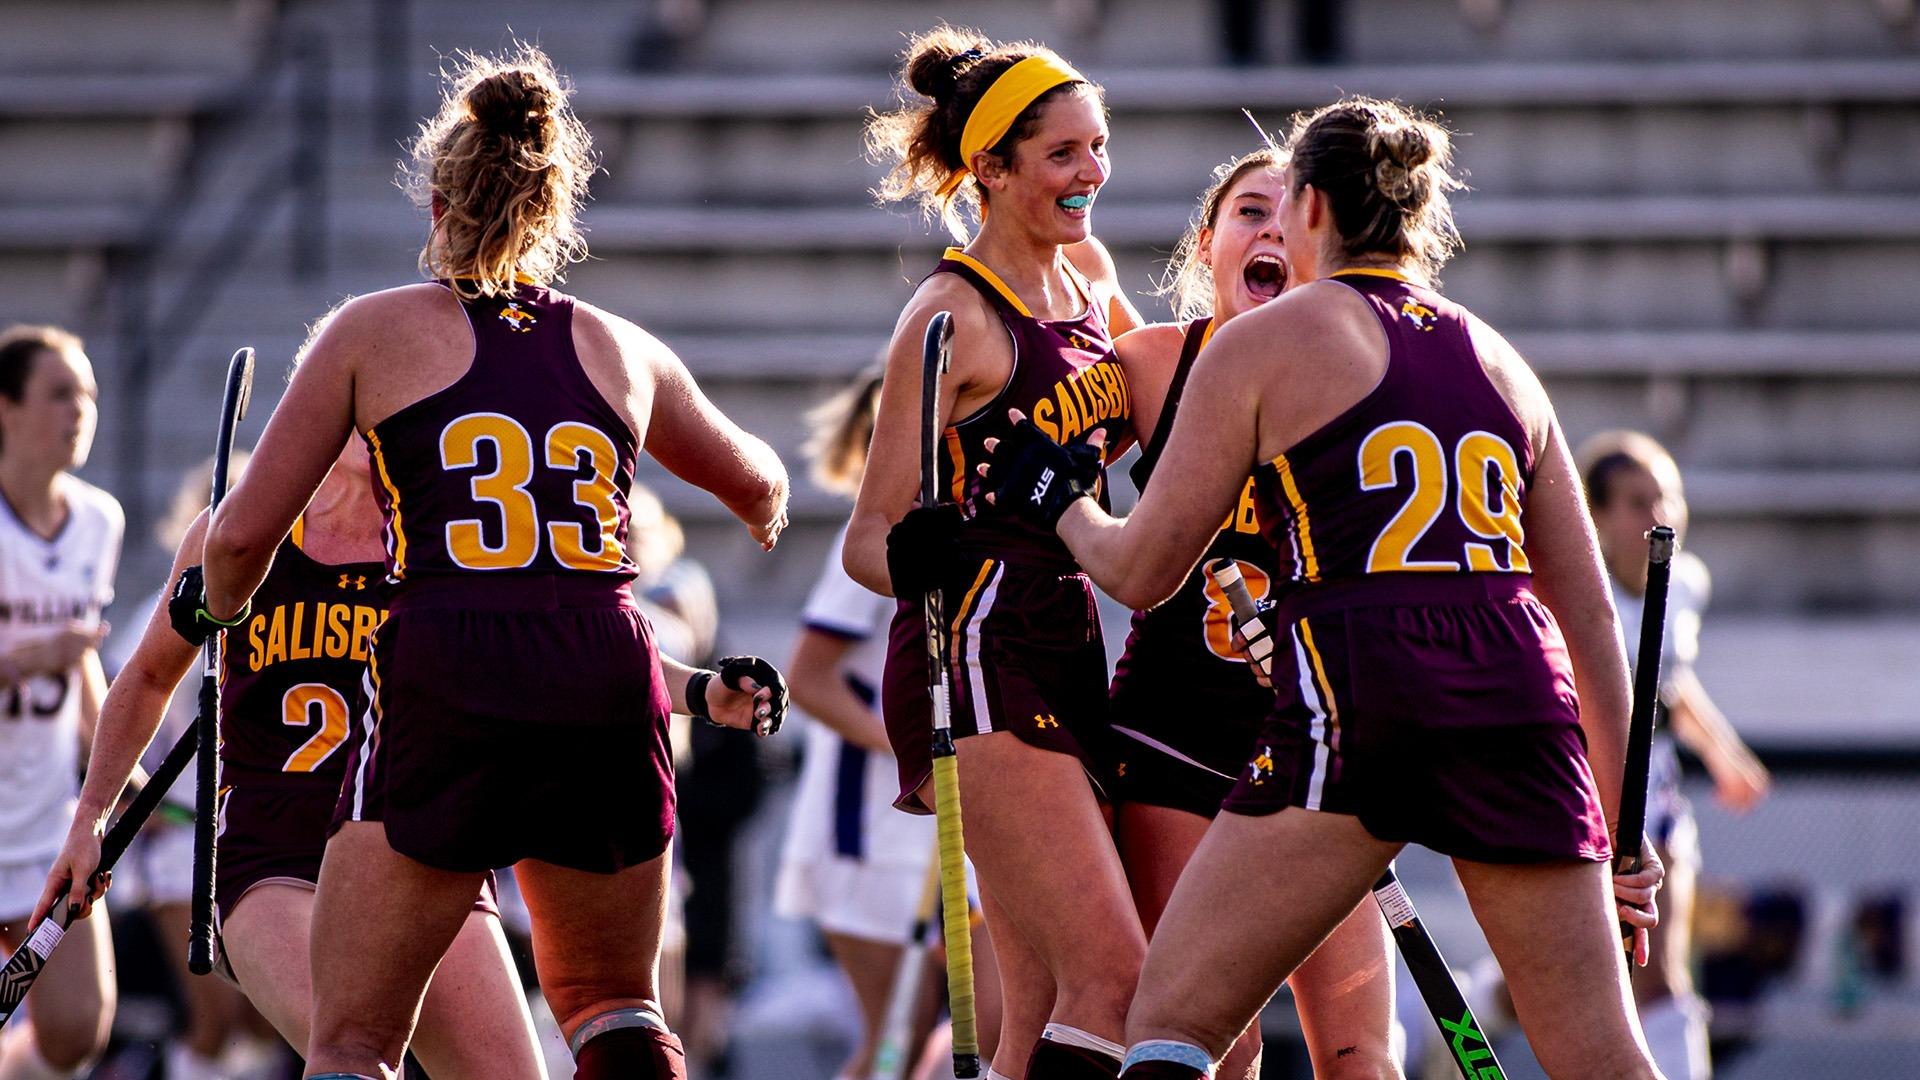 Coffman’s overtime penalty stroke lifts No. 6 Salisbury Field Hockey to national quarterfinals